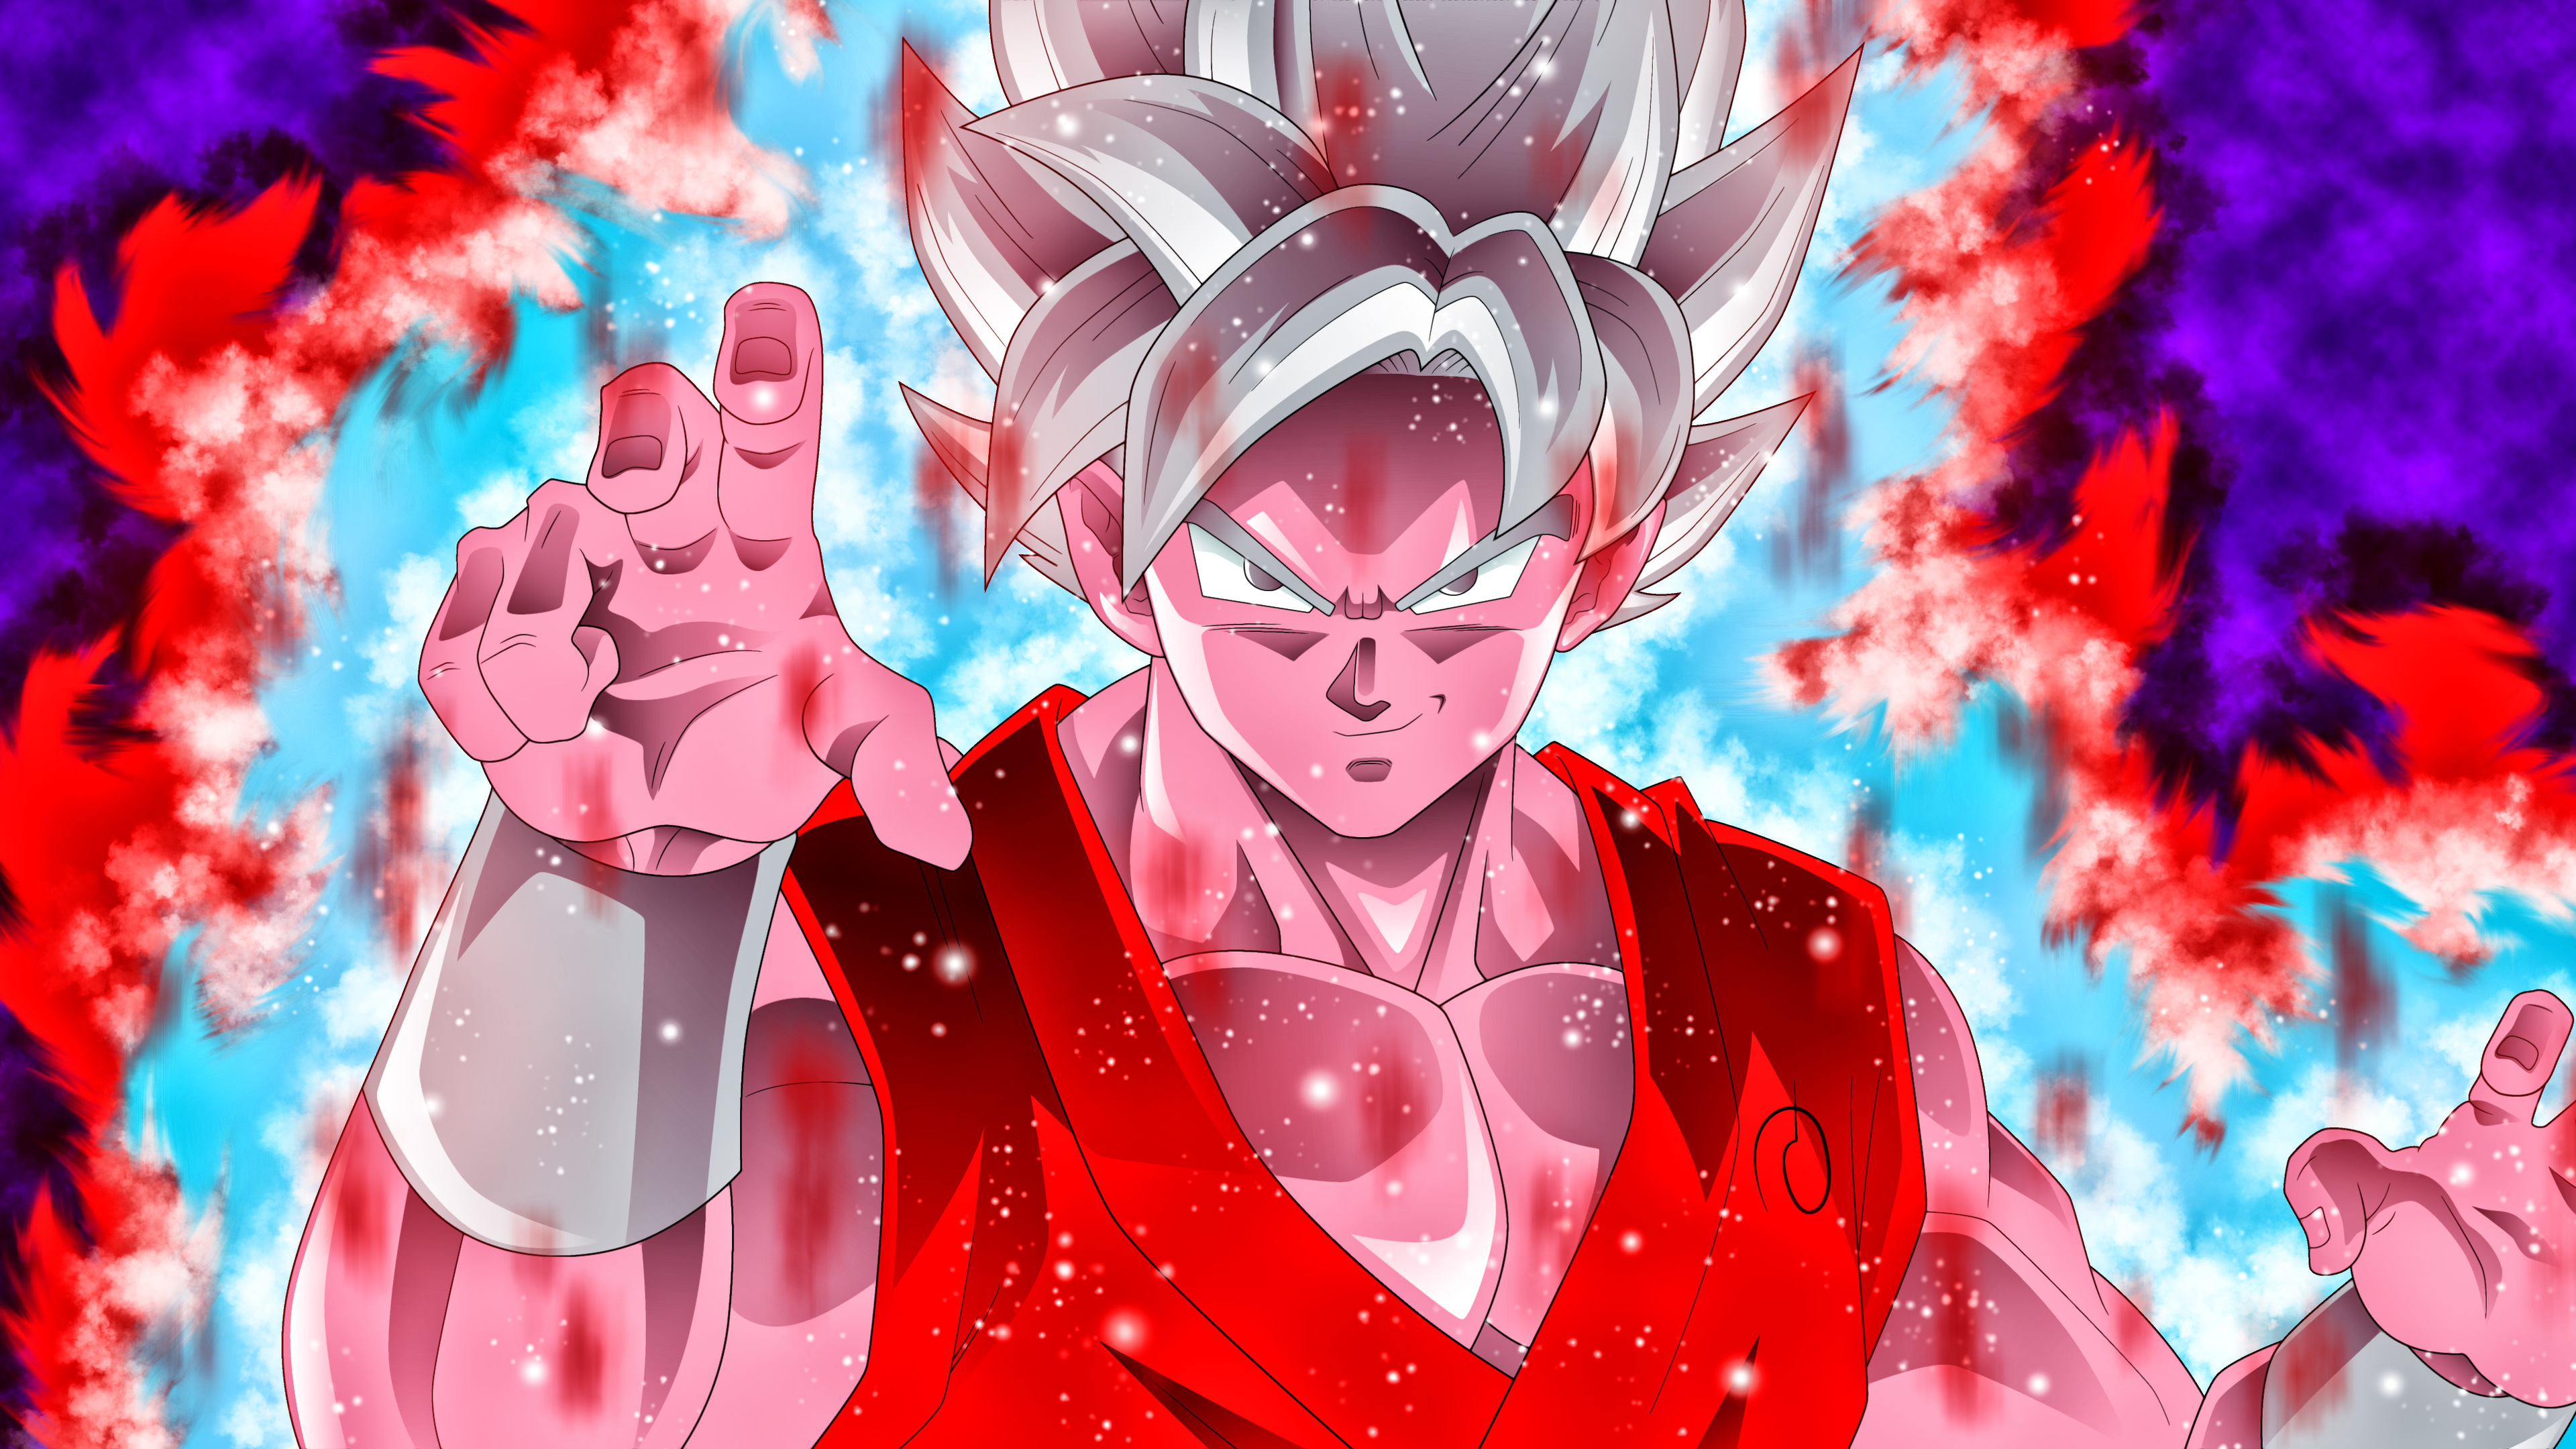 3840x2160 4k Dragon Ball Super Goku 4k HD 4k Wallpapers, Images, Backgrounds, Photos and Pictures